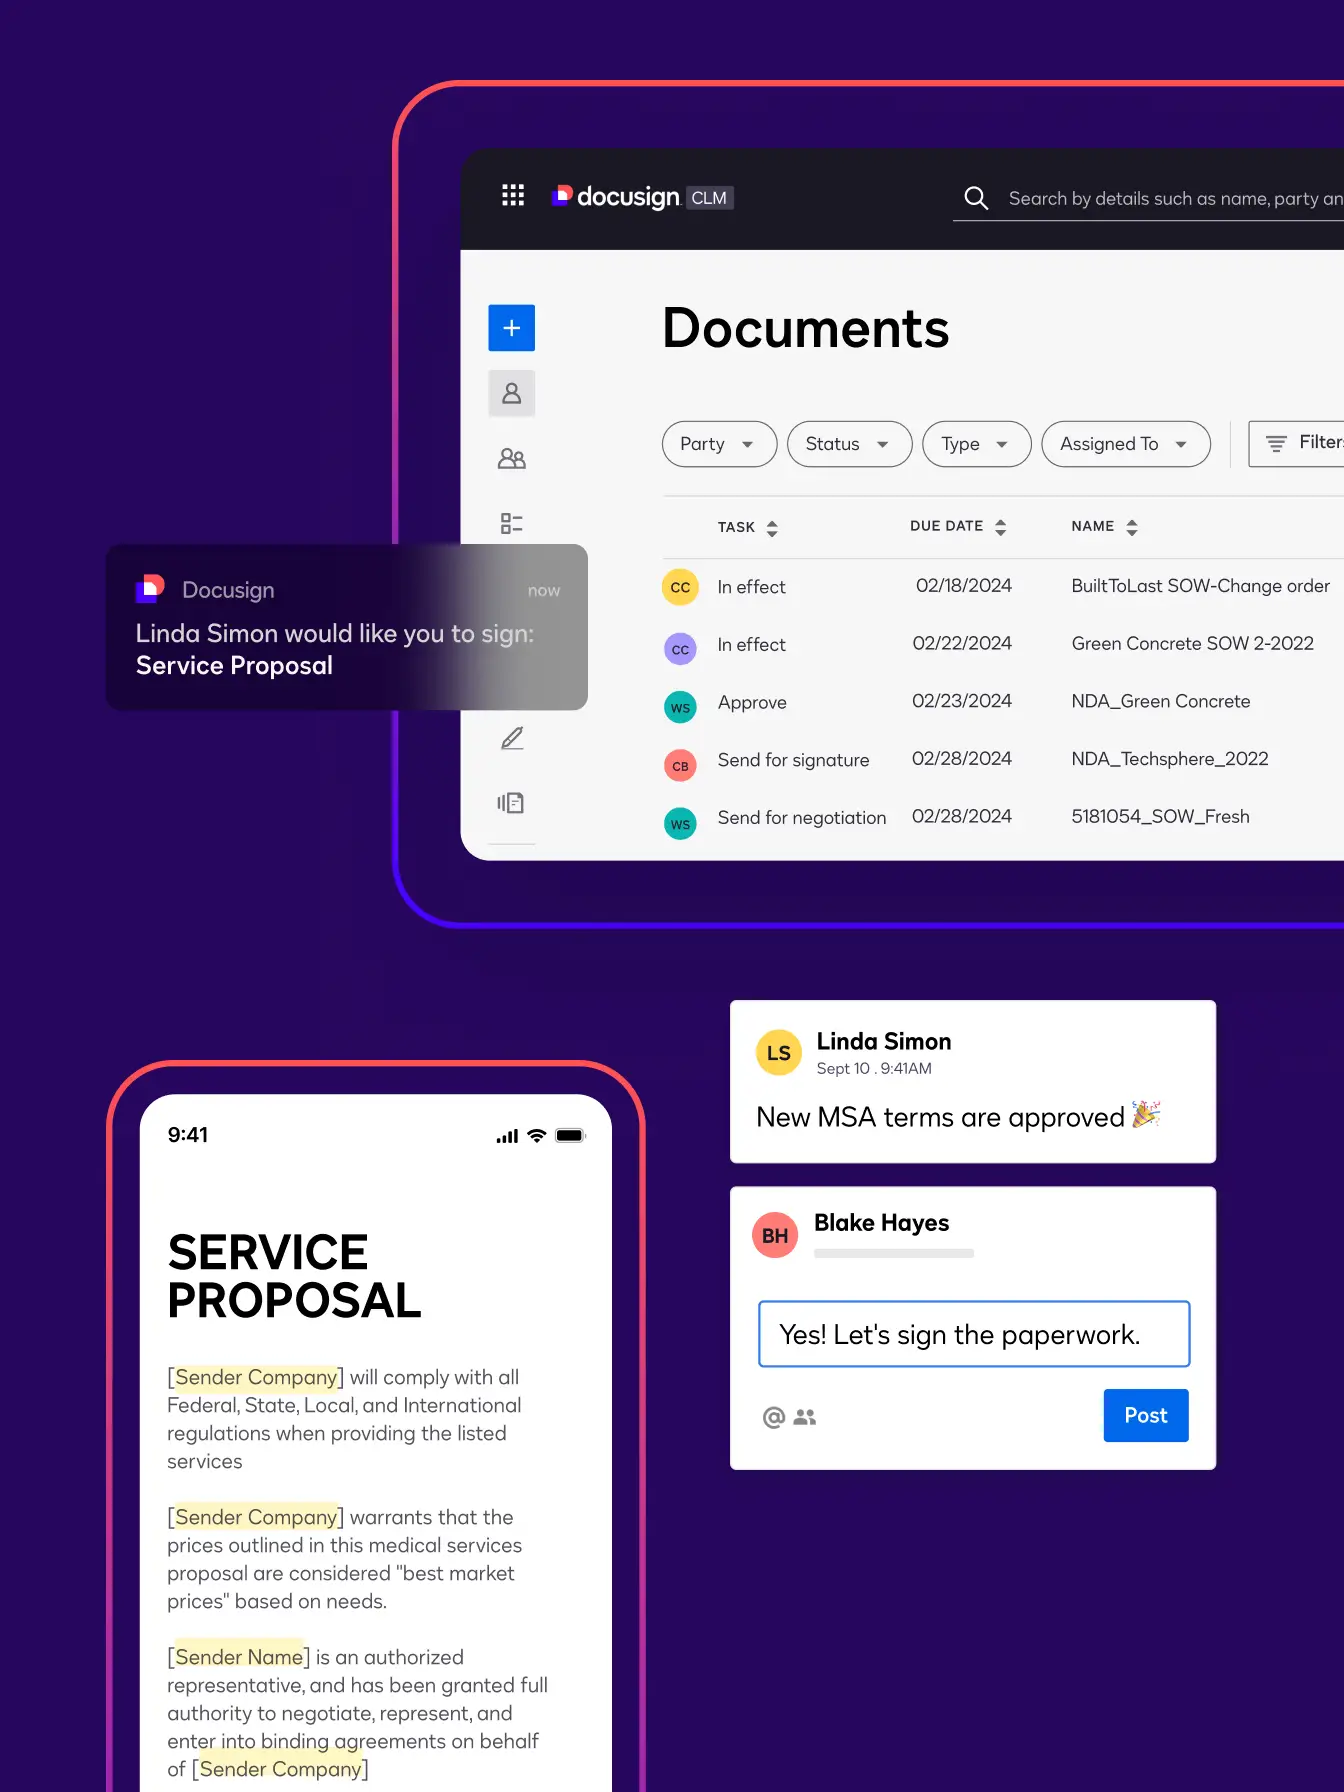 Features in Docusign IAM Core, including a notification prompting a user to sign a service proposal, a dashboard of documents, comments on an agreement, and a service proposal with fields highlighted.